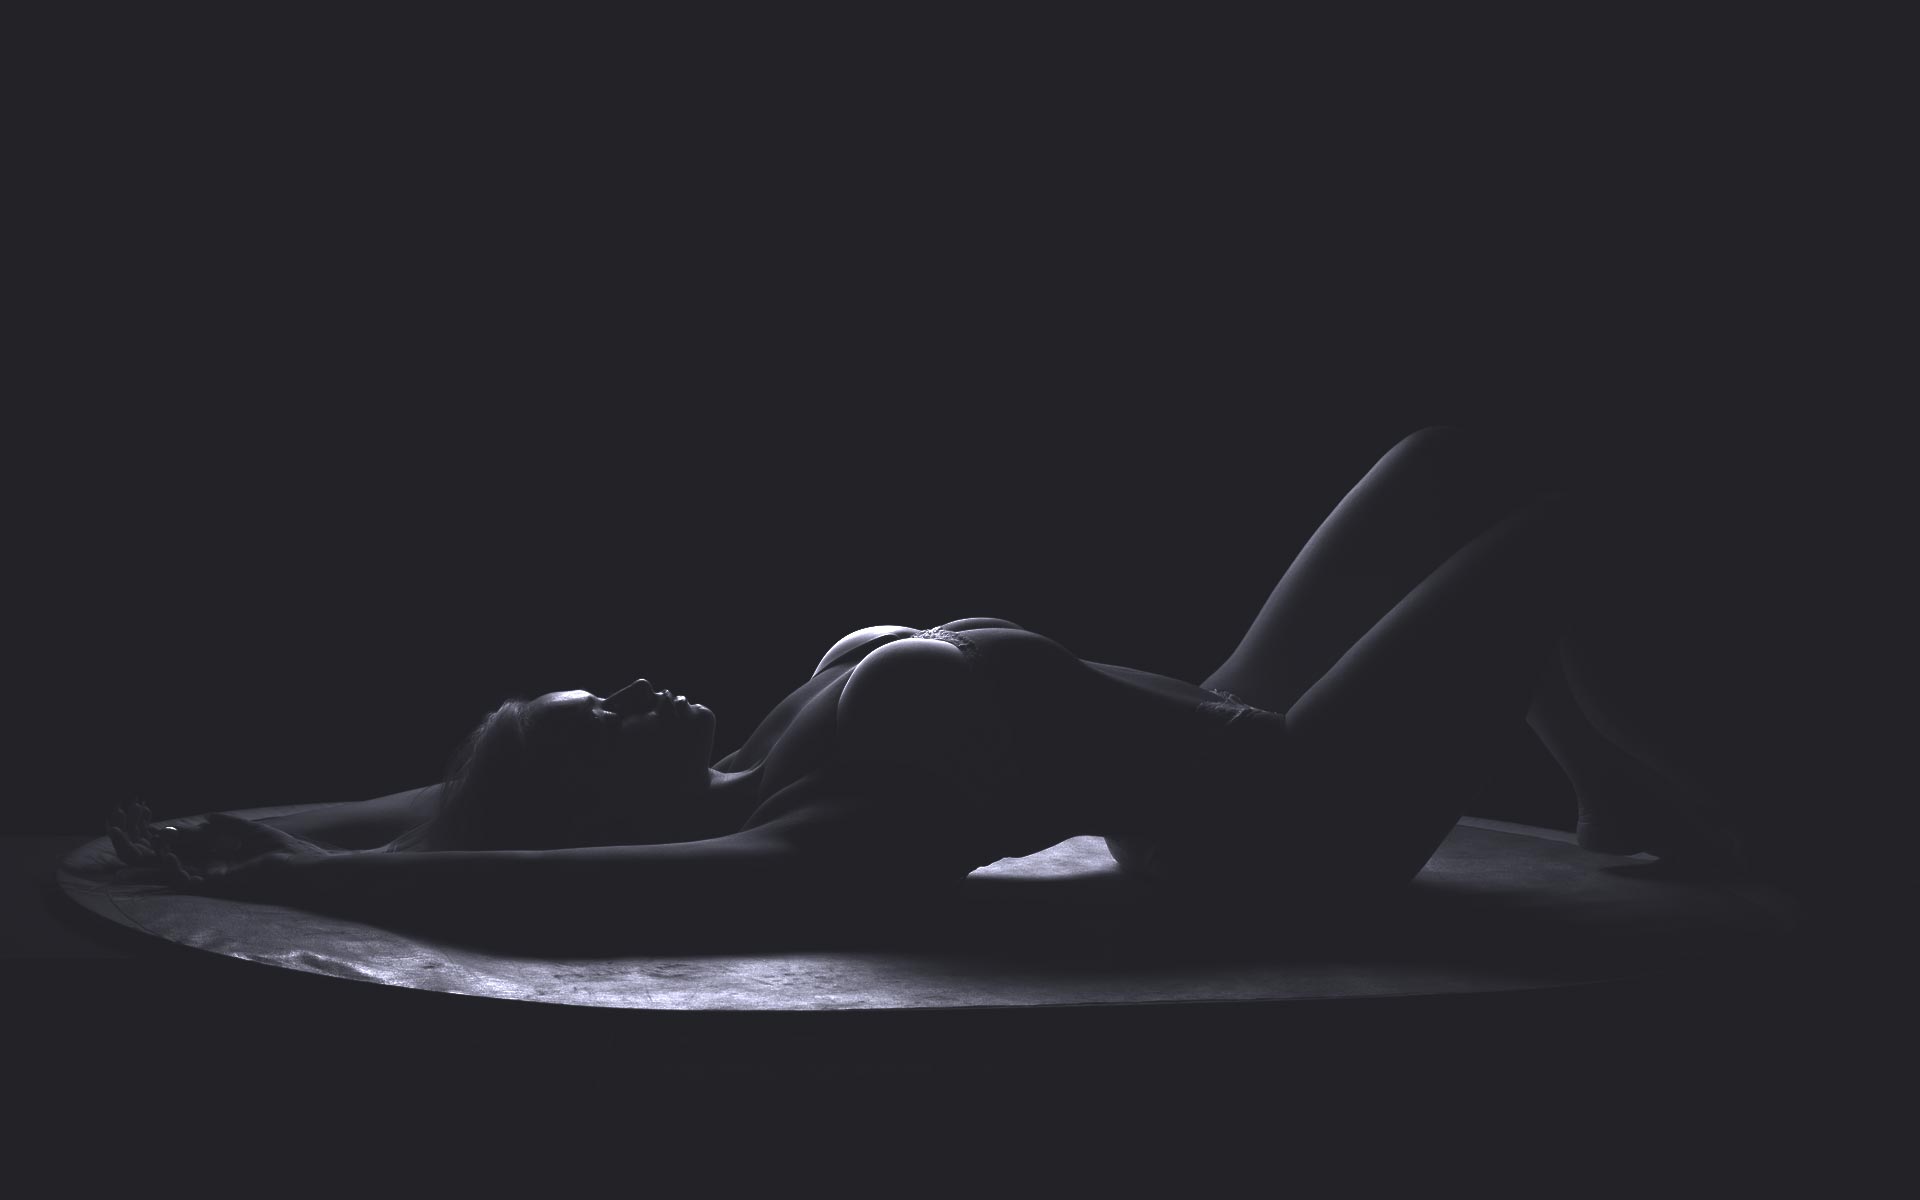 A silhouette of a woman lying on her back in a dimly lit setting, with subtle highlights contouring her figure as she begins to awaken.